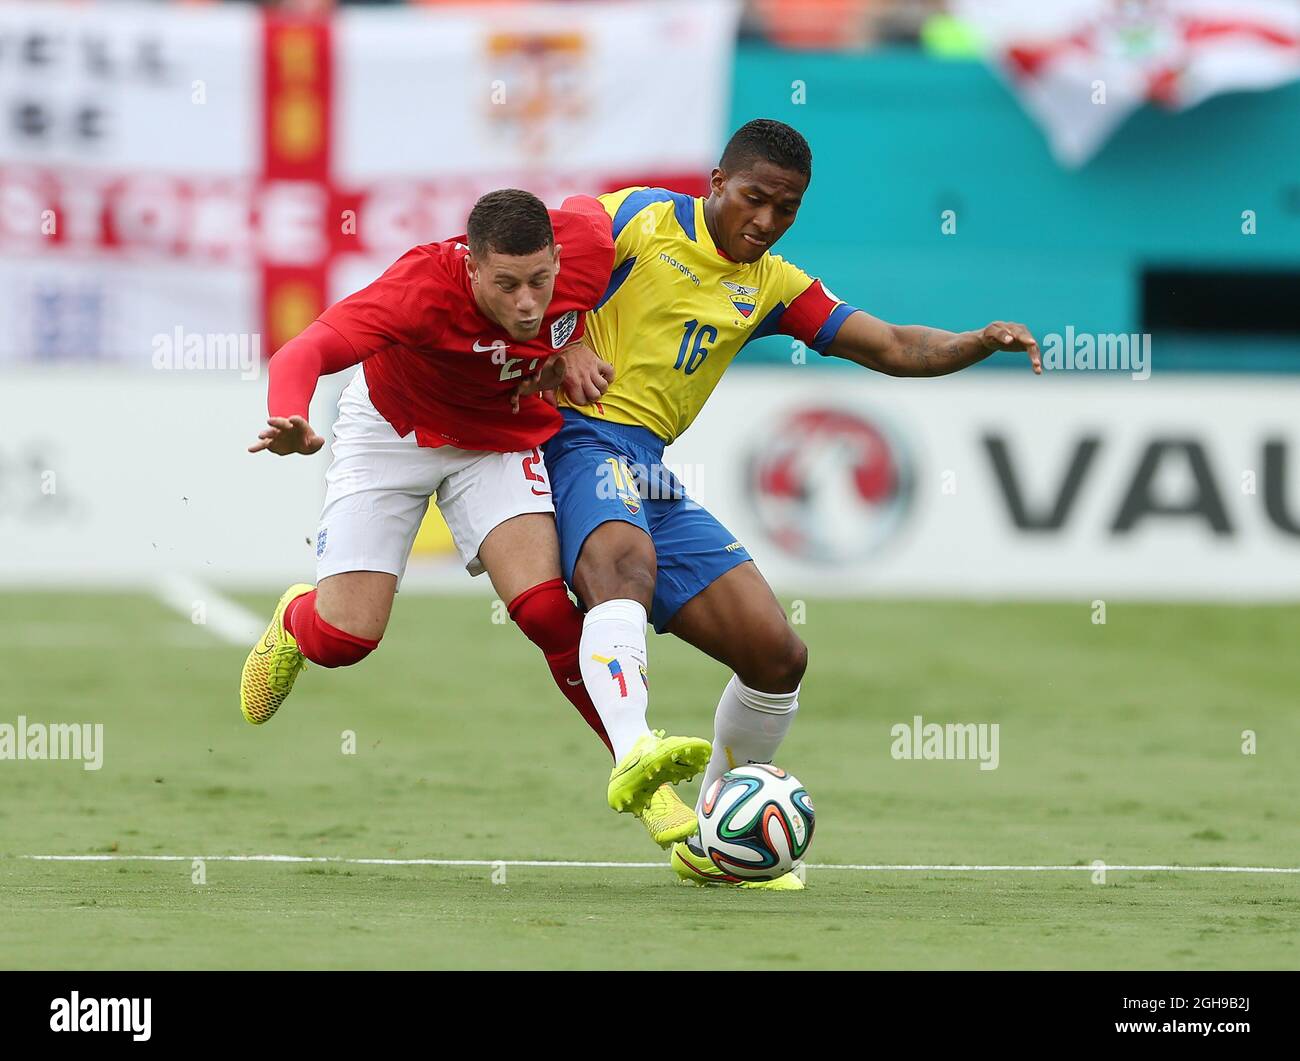 England's Ross Barkley tussles with Ecuador's Antonio Valencia during the International Friendly match between England and Ecuador held at Sun Life Stadium in Miami, USA on June 4, 2014. Pic David Klein/Sportimage. Stock Photo